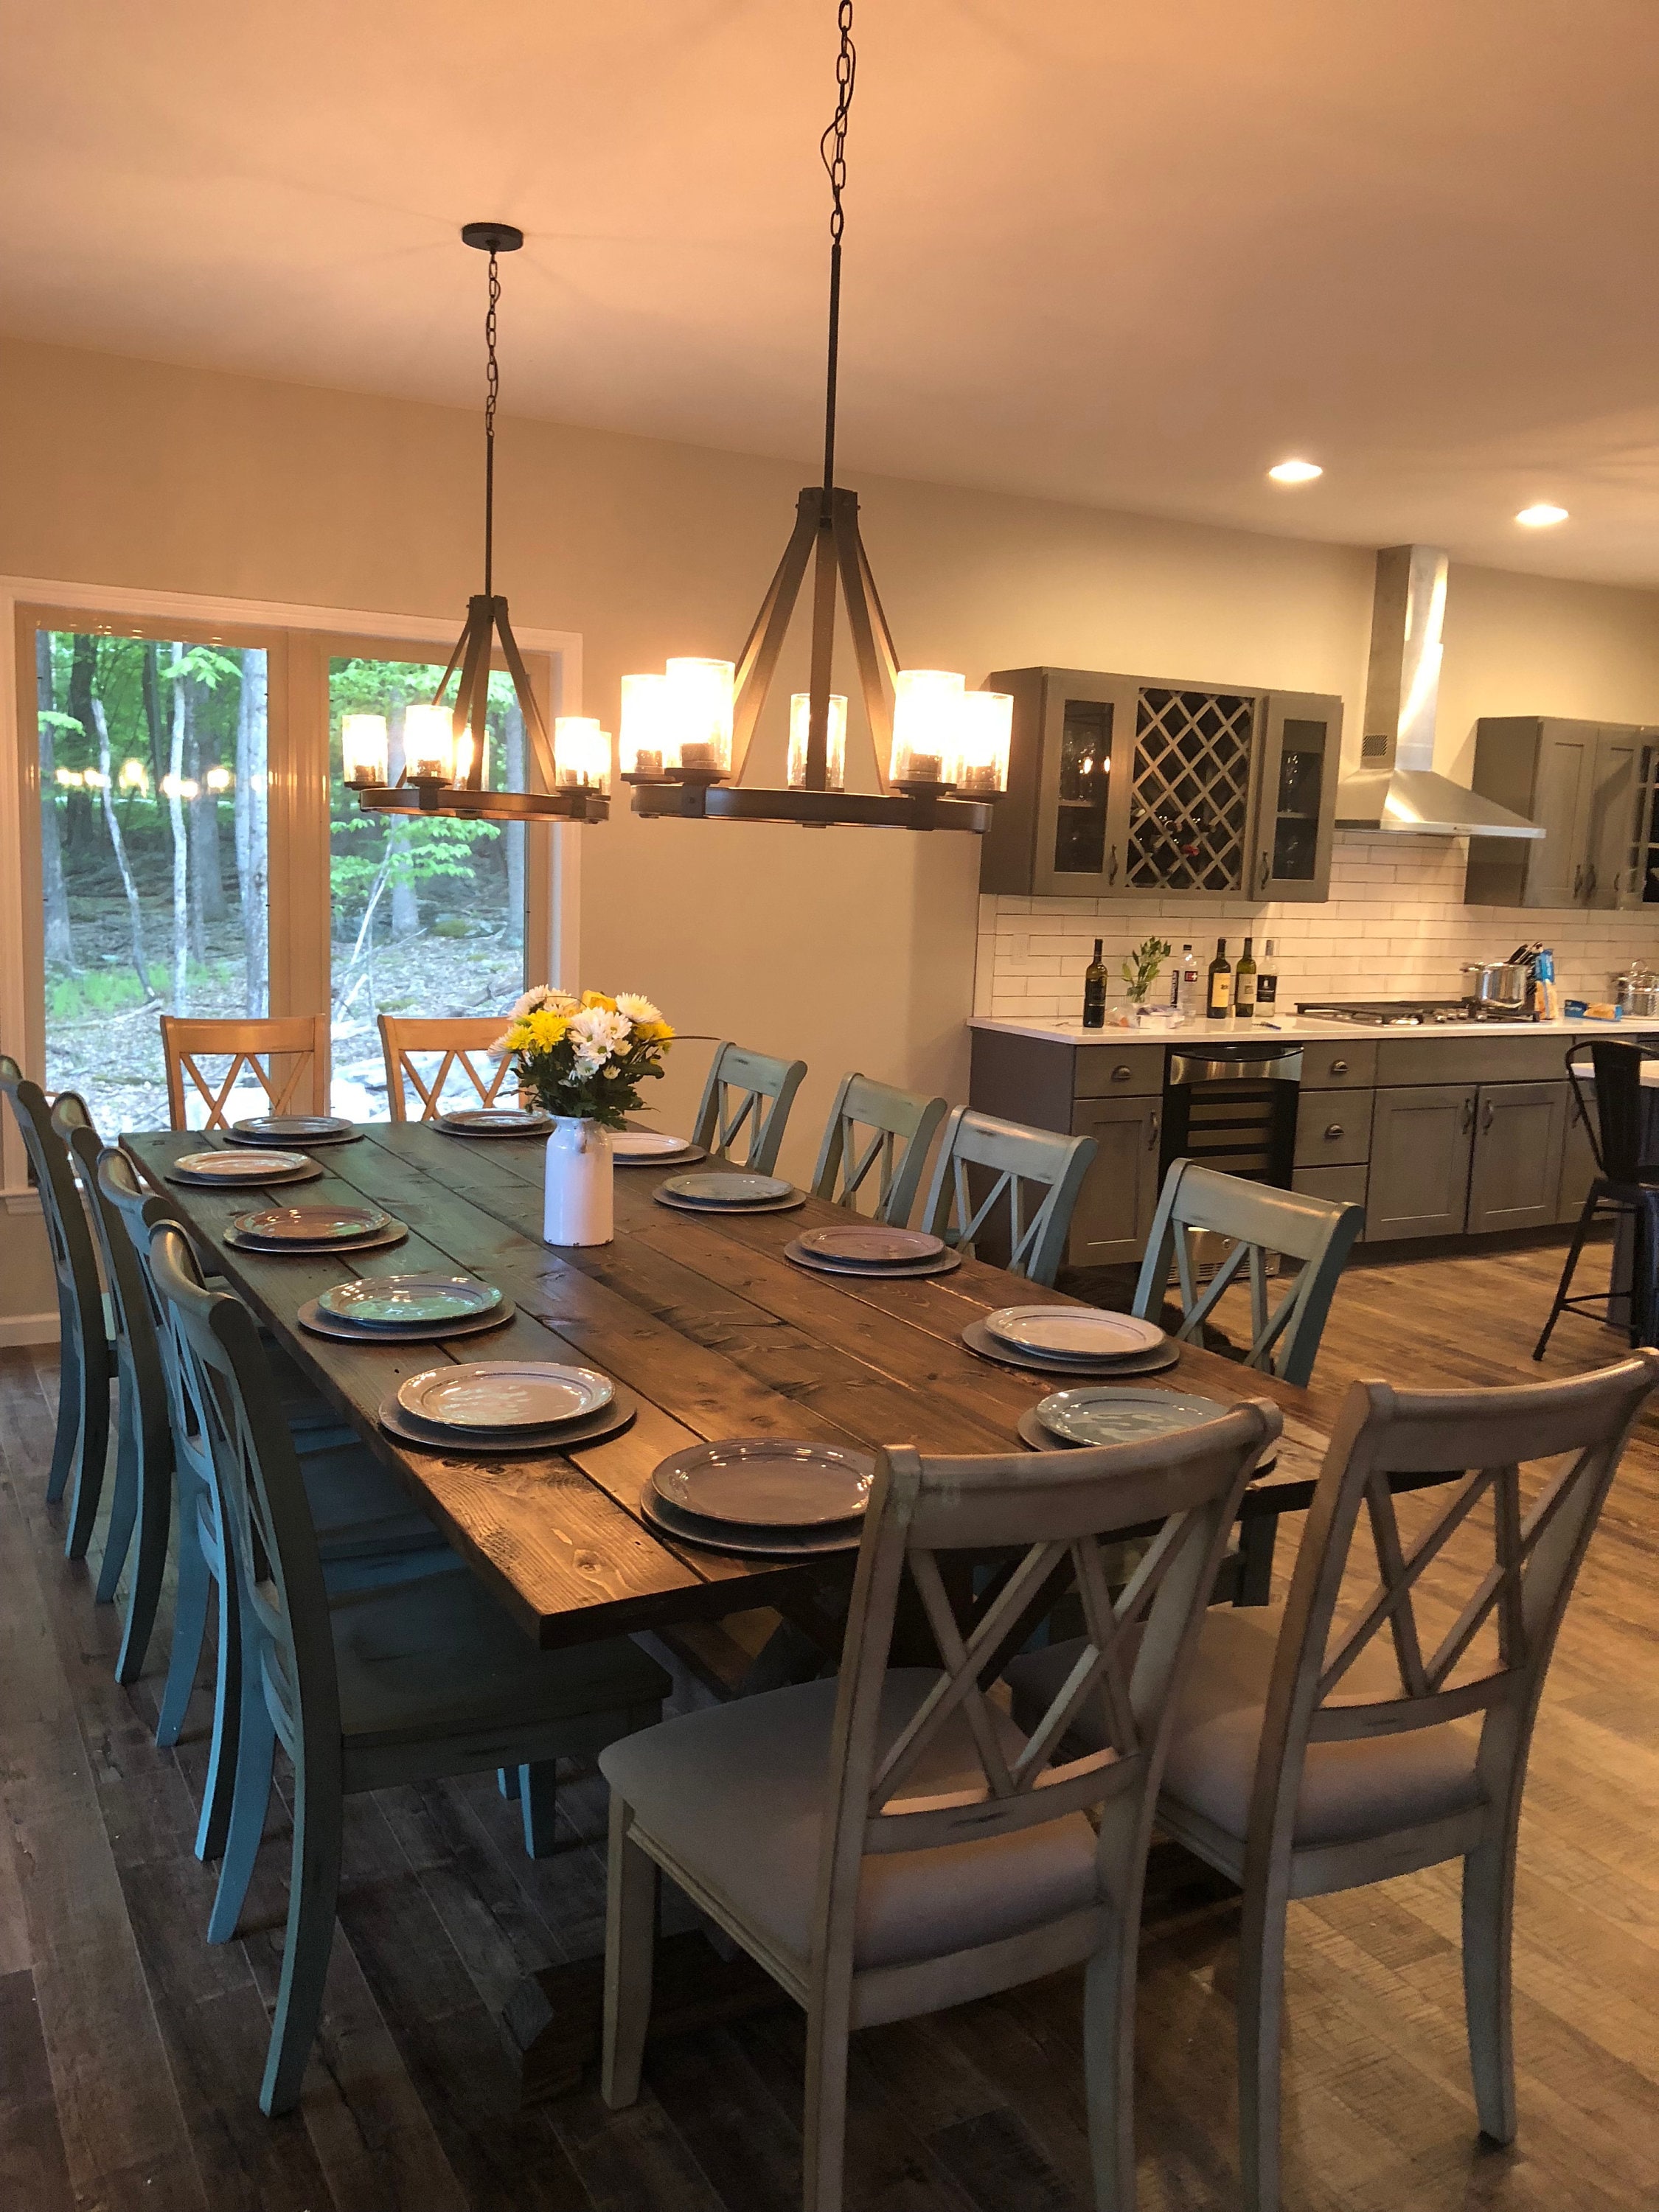 Large Farmhouse Table Rustic Farm, Rustic Modern Dining Room Table And Chairs